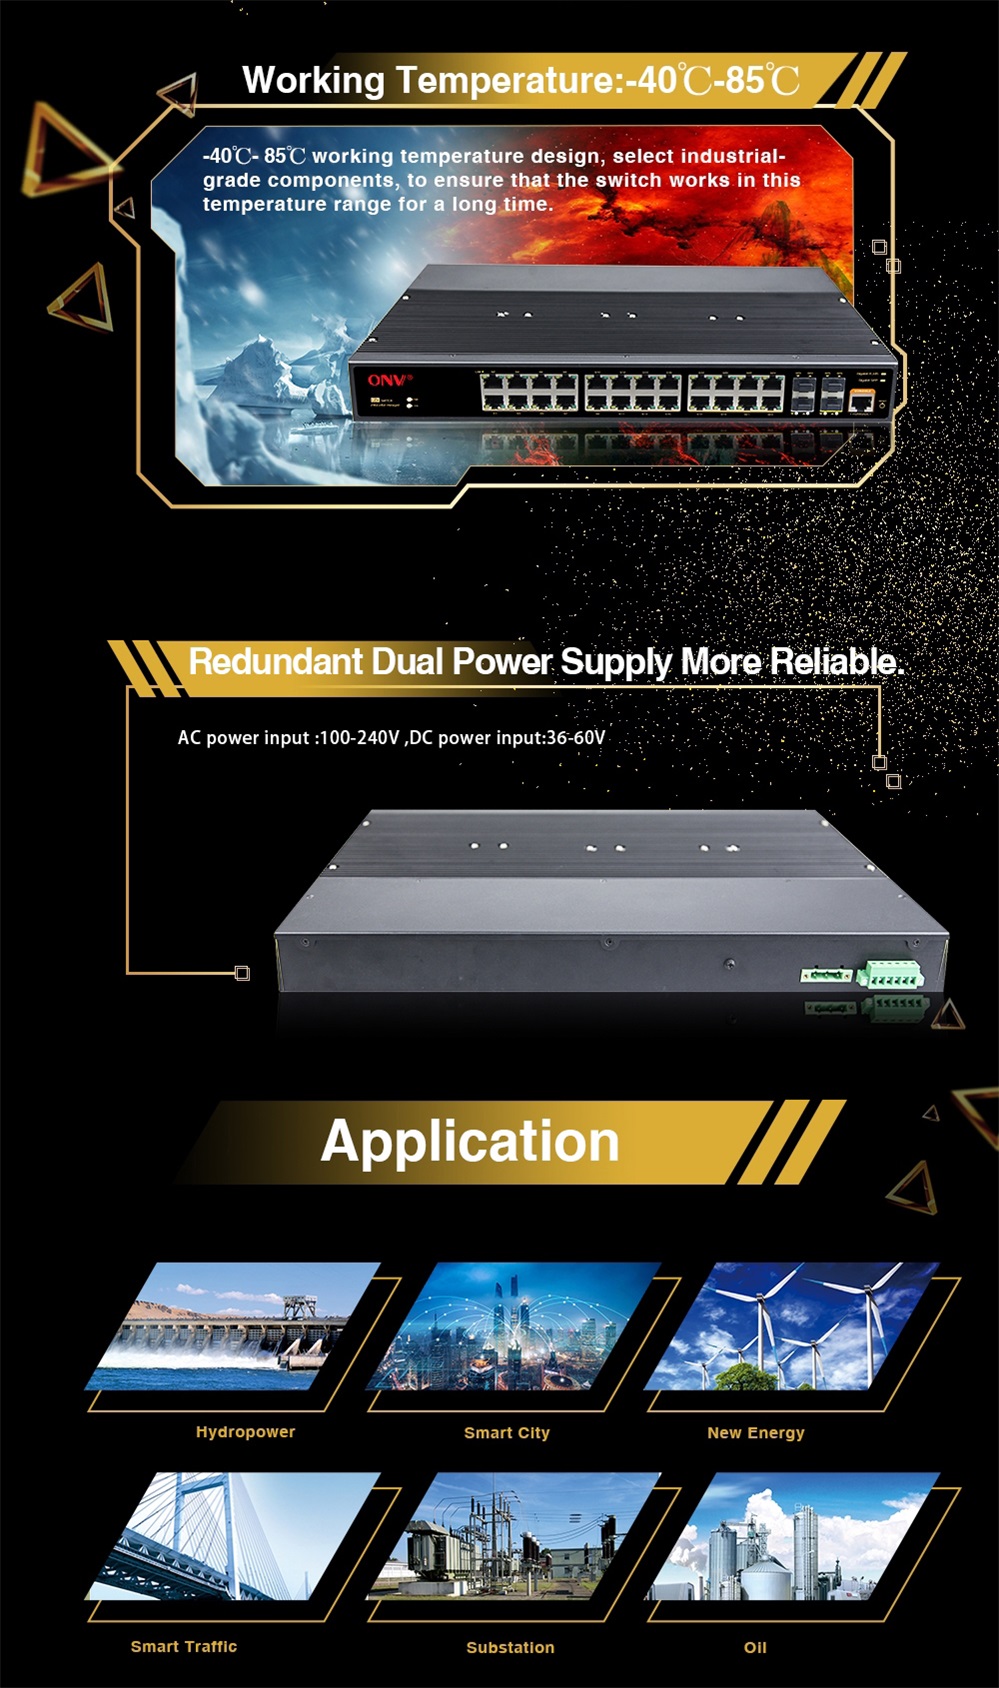 With the continuous expansion of industrial big data construction, the demand for monitoring data transmission equipment in various industries is increasing.  At the same time, how to choose a managed industrial Ethernet switch, that meets monitoring network architecture has higher requirements.   Optical Network Video [ONV PoE switch brand] has launched a high-performance 28/36-port 1/10G managed industrial Ethernet fiber switch for the current market demand. Their models are: ONV-IPS33026FM 24*10/100/1000M RJ45 ports and 4*100/1000M SFP+fiber slot ports (2 set combo ports) ONV-IPS36028FM 24*10/100/1000M RJ45 ports and 4*1/10G SFP+ fiber slot ports ONV-IPS36036FM 24*10/100/1000M RJ45 ports and 8*100/1000M SFP fiber slot ports and 4*1/10G SFP+ fiber slot ports.   The 28/36-port 1/10G managed industrial Ethernet switch complies with FCC, CE, and RoHS standards. They are available in a variety of combinations, including Fast Ethernet and fiber optic SFP port, with 24*10/100/1000M RJ45 ports and 4*1/10G SFP+ slot ports for increased flexibility in designing networks and applications. This series of Industrial switches supports port-based VLAN, 802.1Q-based VLAN, QoS, IGMP Snooping, RSTP, broadcast storm suppression, port aggregation, port mirroring, port management, SNM, Web, CLI, SNMP, Telnet, NTP, etc. The management method is better to provide a safe and reliable solution for the establishment of fast and stable remote terminal access networks for industrial automation, rail transit, video surveillance, and other harsh industrial environment applications.   The industrial Ethernet fiber switches can be set up to set up a fast recovery self-healing ring network with each port. The self-healing time is less than 50ms, which provides a powerful guarantee for users' network security. The working temperature is -40°C ~ 85°C, adapt to a variety of harsh industrial environments. The industrial switches can be placed in the control box. Rail mounting, IP40 casing and LED indicators to make it a plug-and-play industrial-grade device that provides a reliable and convenient solution for networking Ethernet devices.